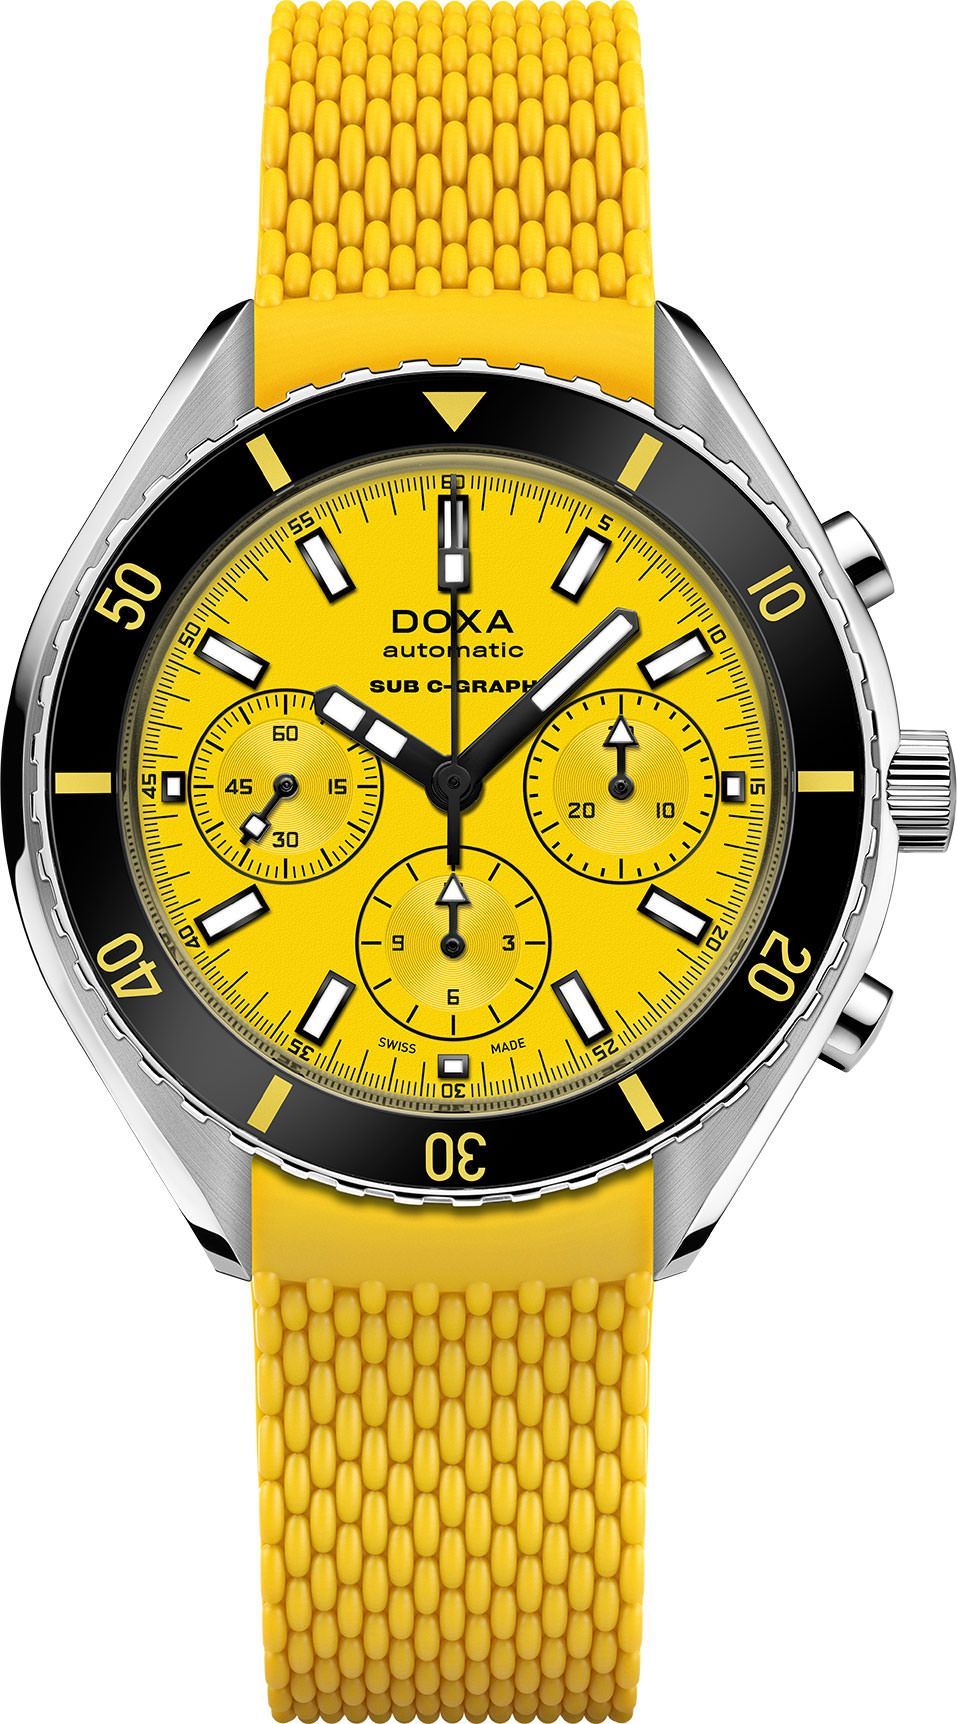 Doxa SUB 200 C-GRAPH Divingstar Yellow Dial 45 mm Automatic Watch For Men - 1